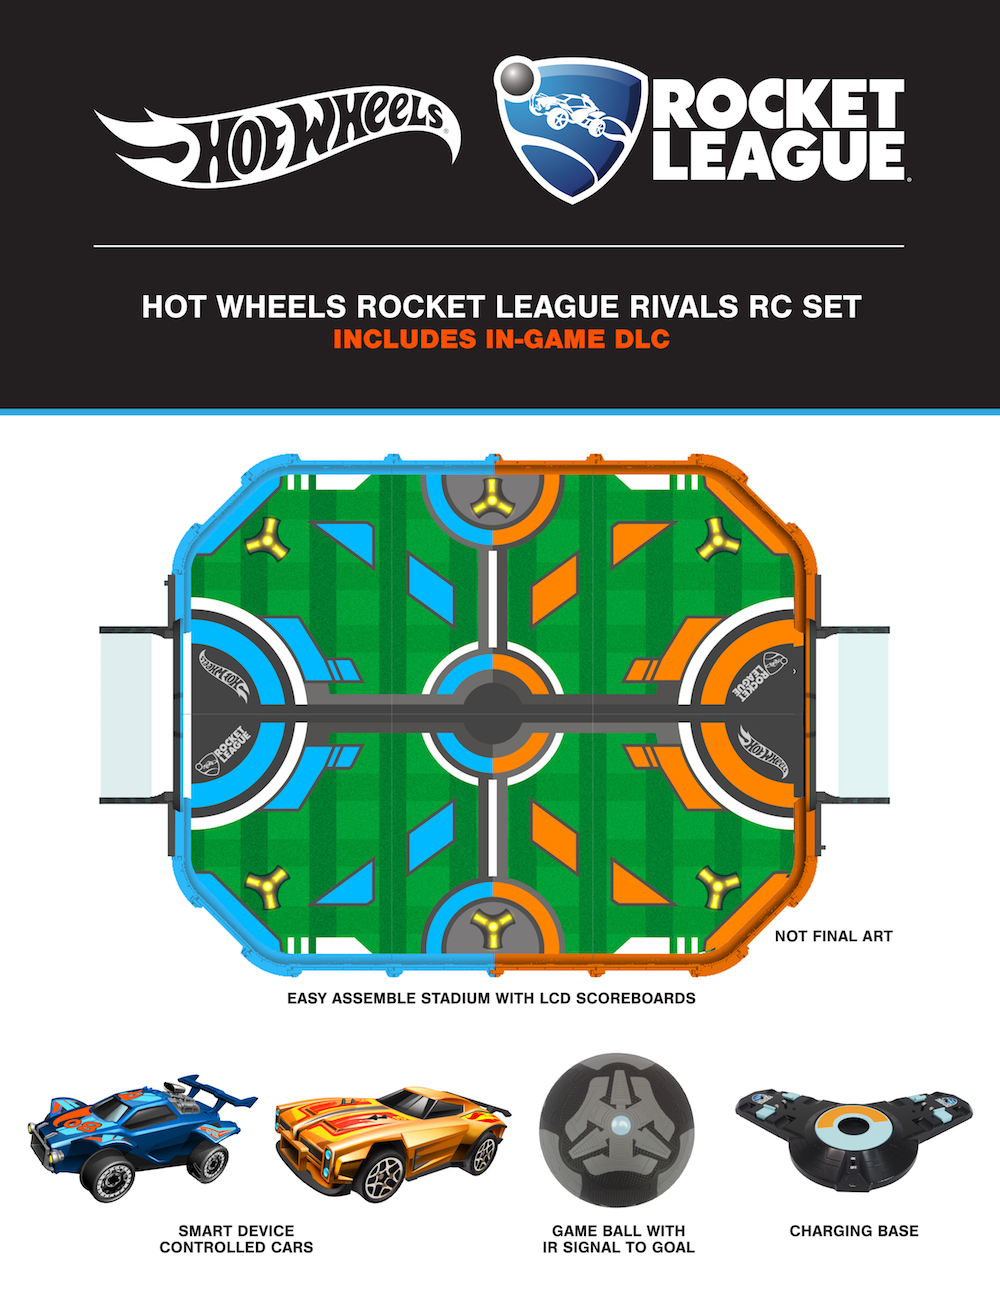 Hot Wheels to Release Smartphone Controlled 'Rocket League' RC Car Set this Holiday for $180